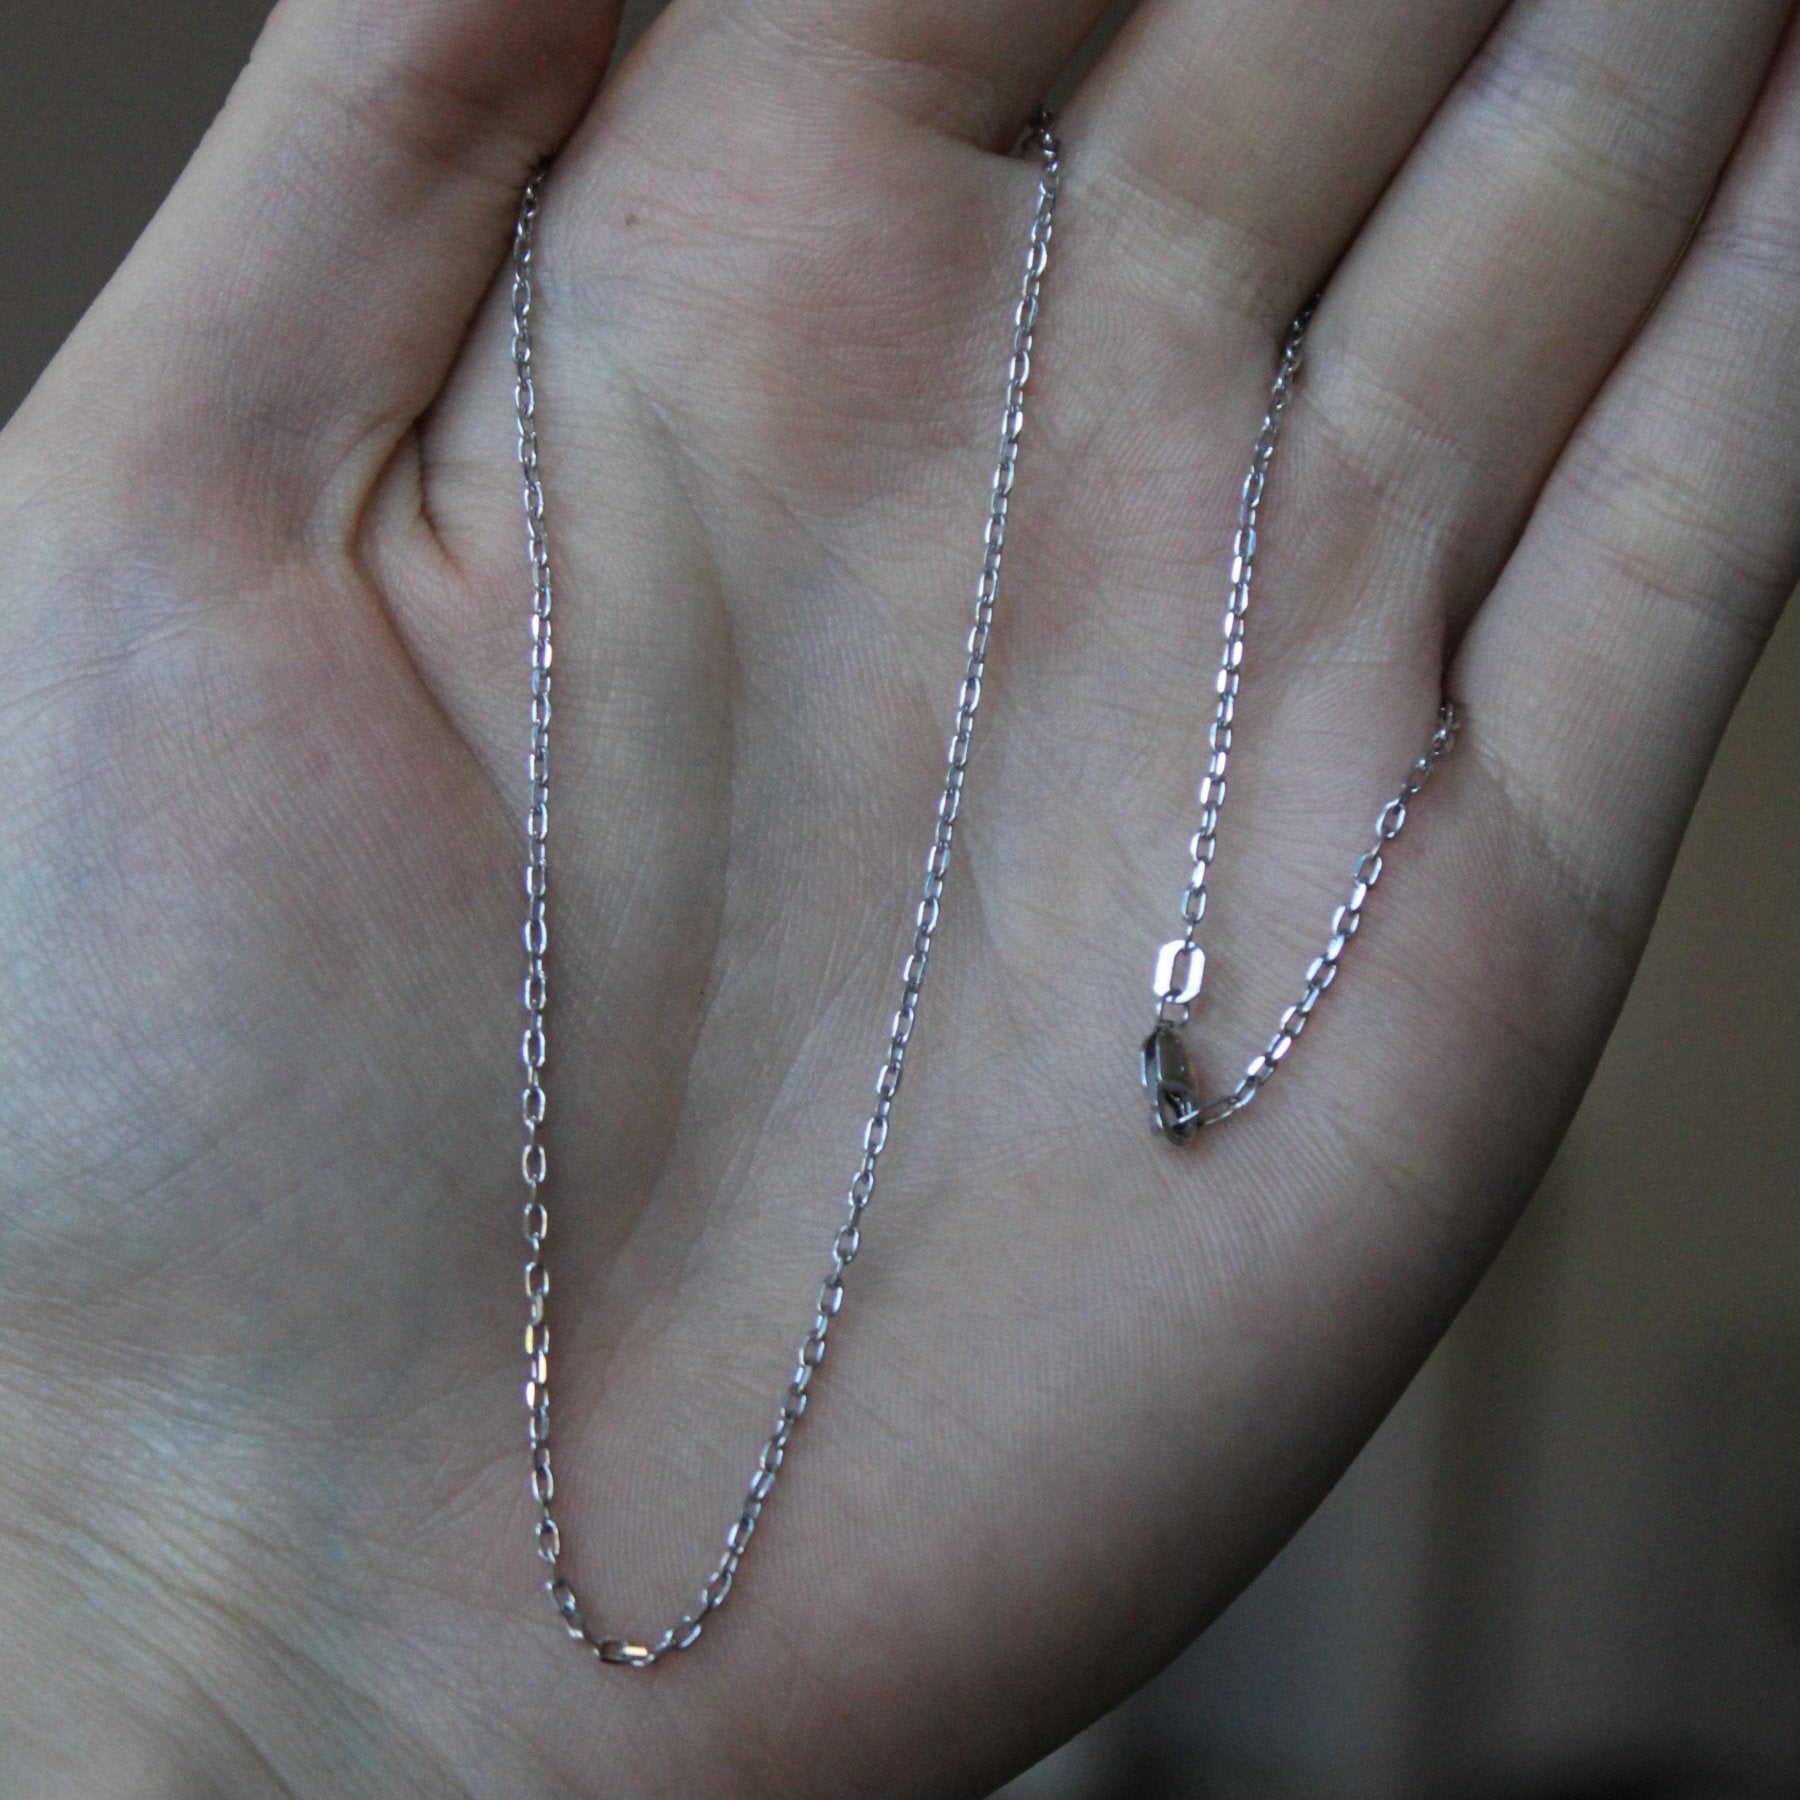 10k White Gold Cable Chain | 20